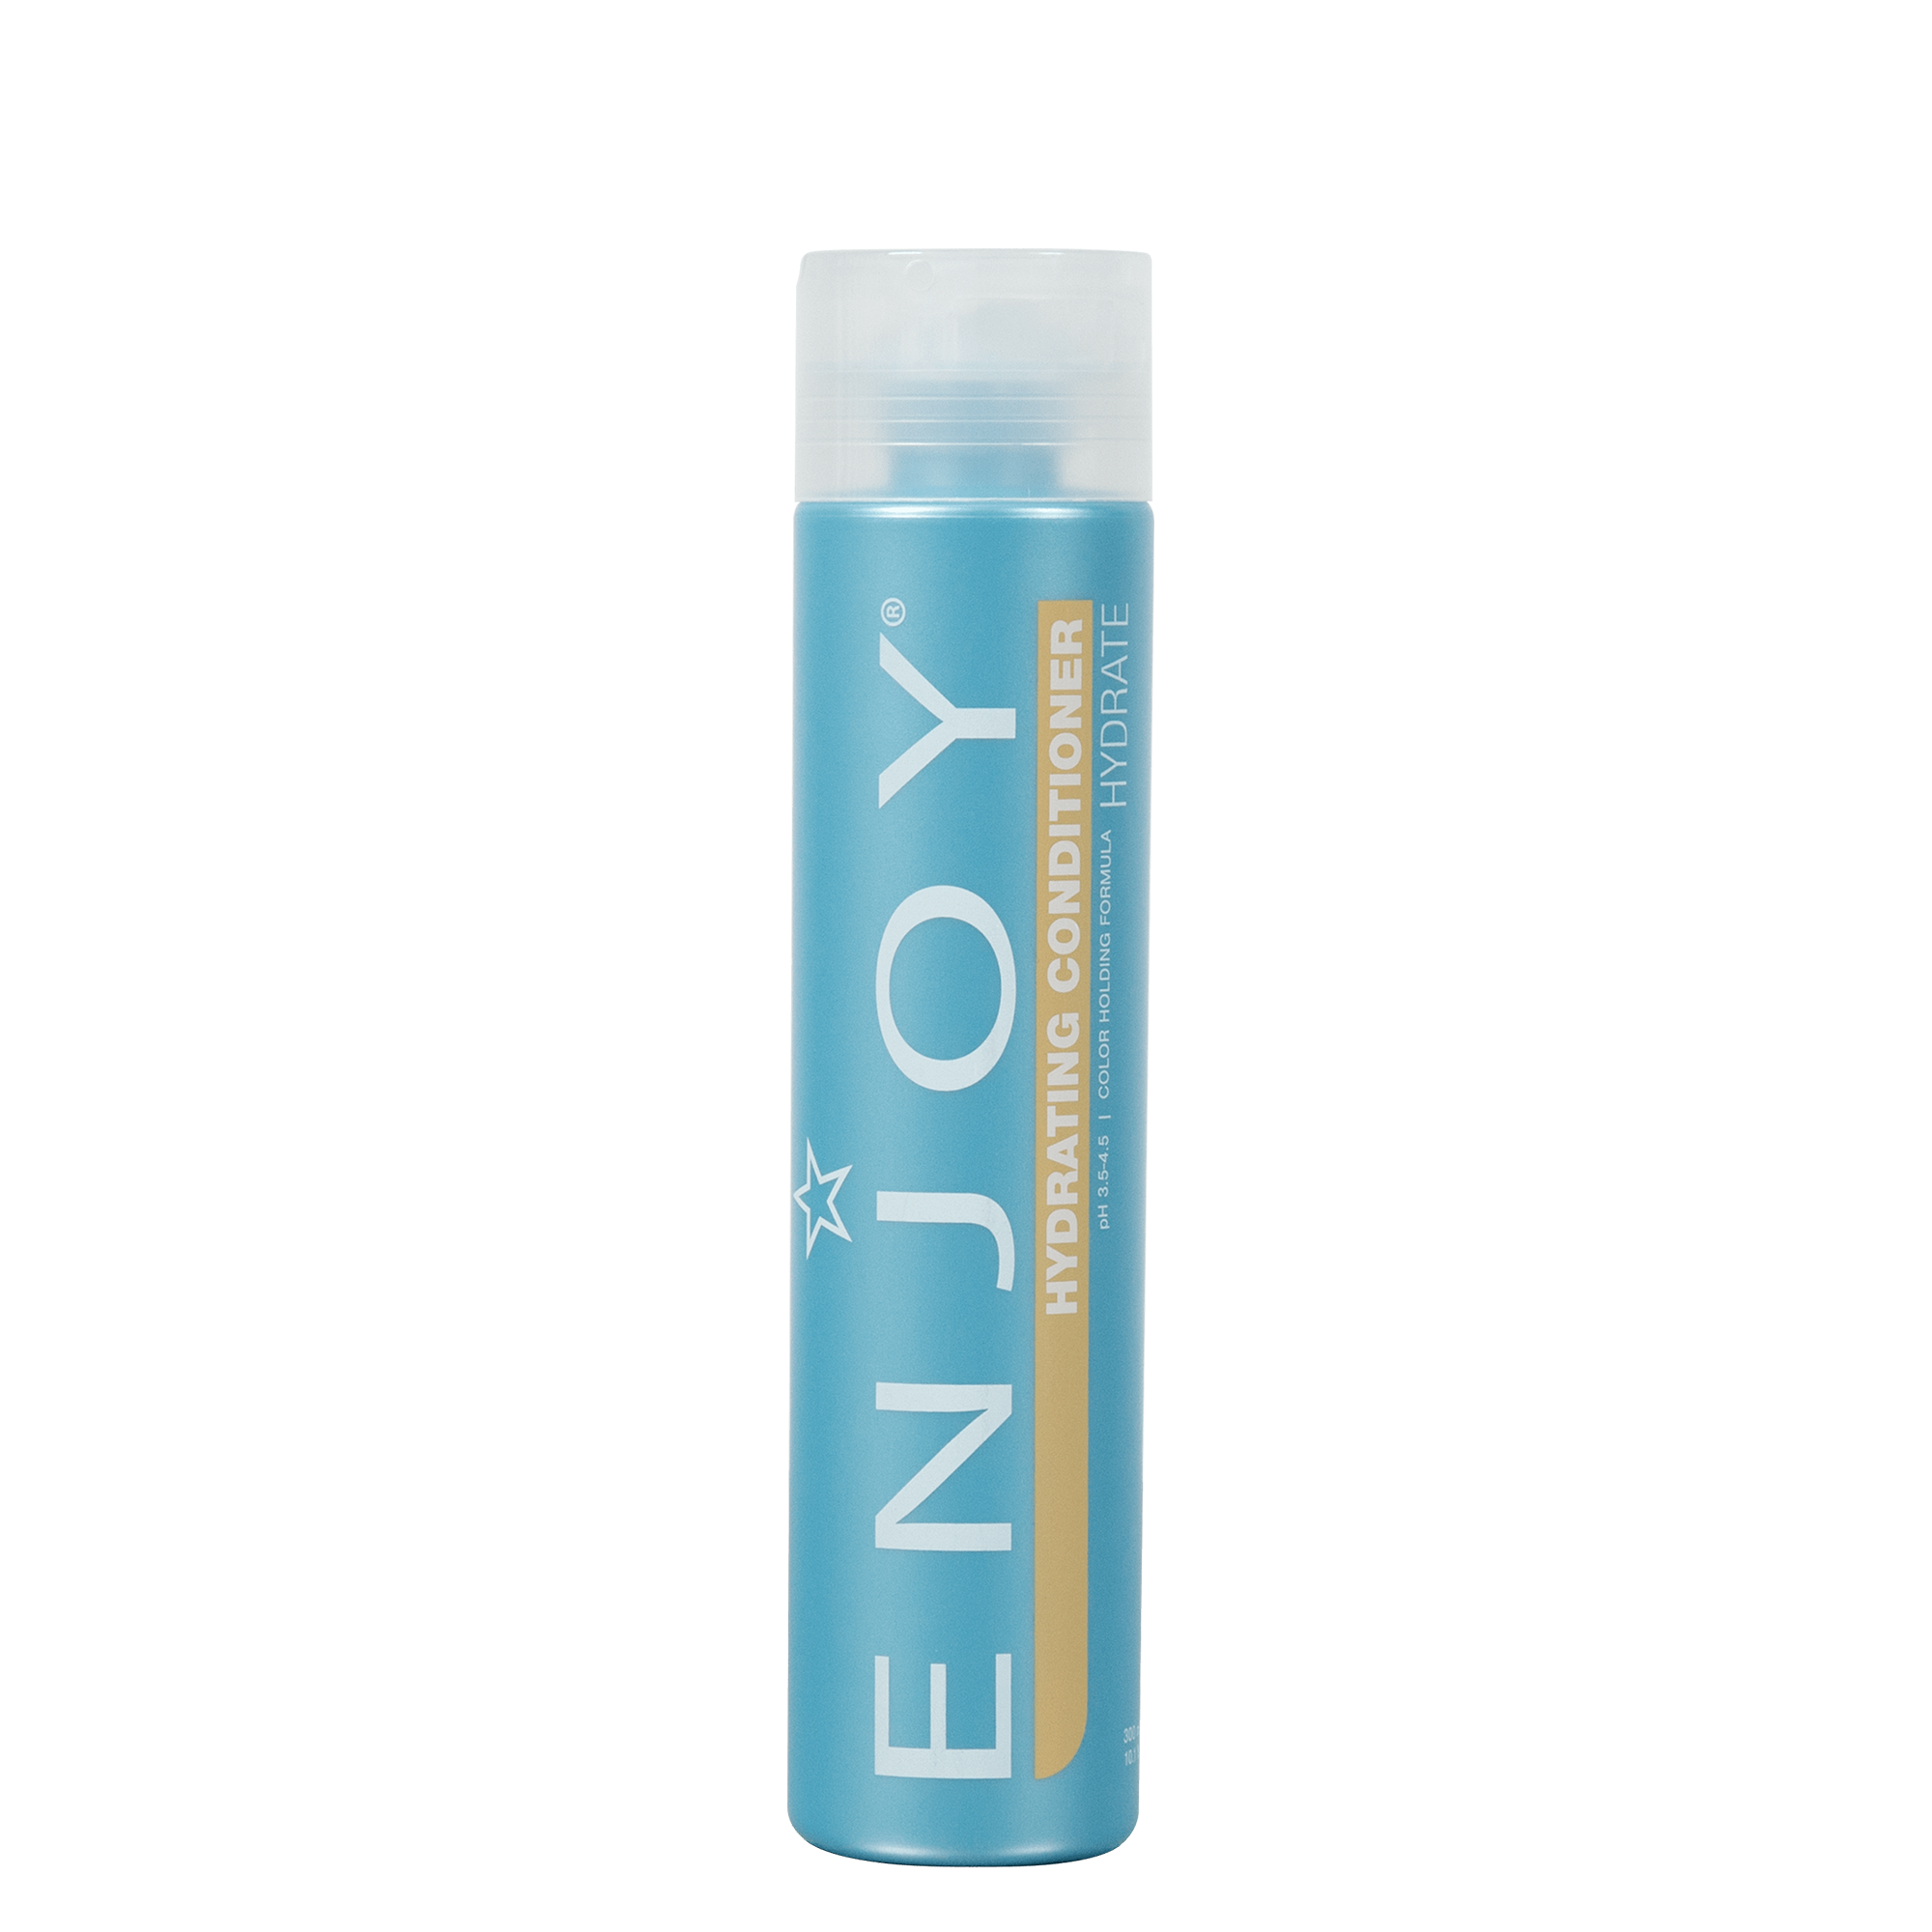 Enjoy Hydrate Hydrating Shampoo and Conditioner 10oz Duo ($47 Value) / 10 OZ